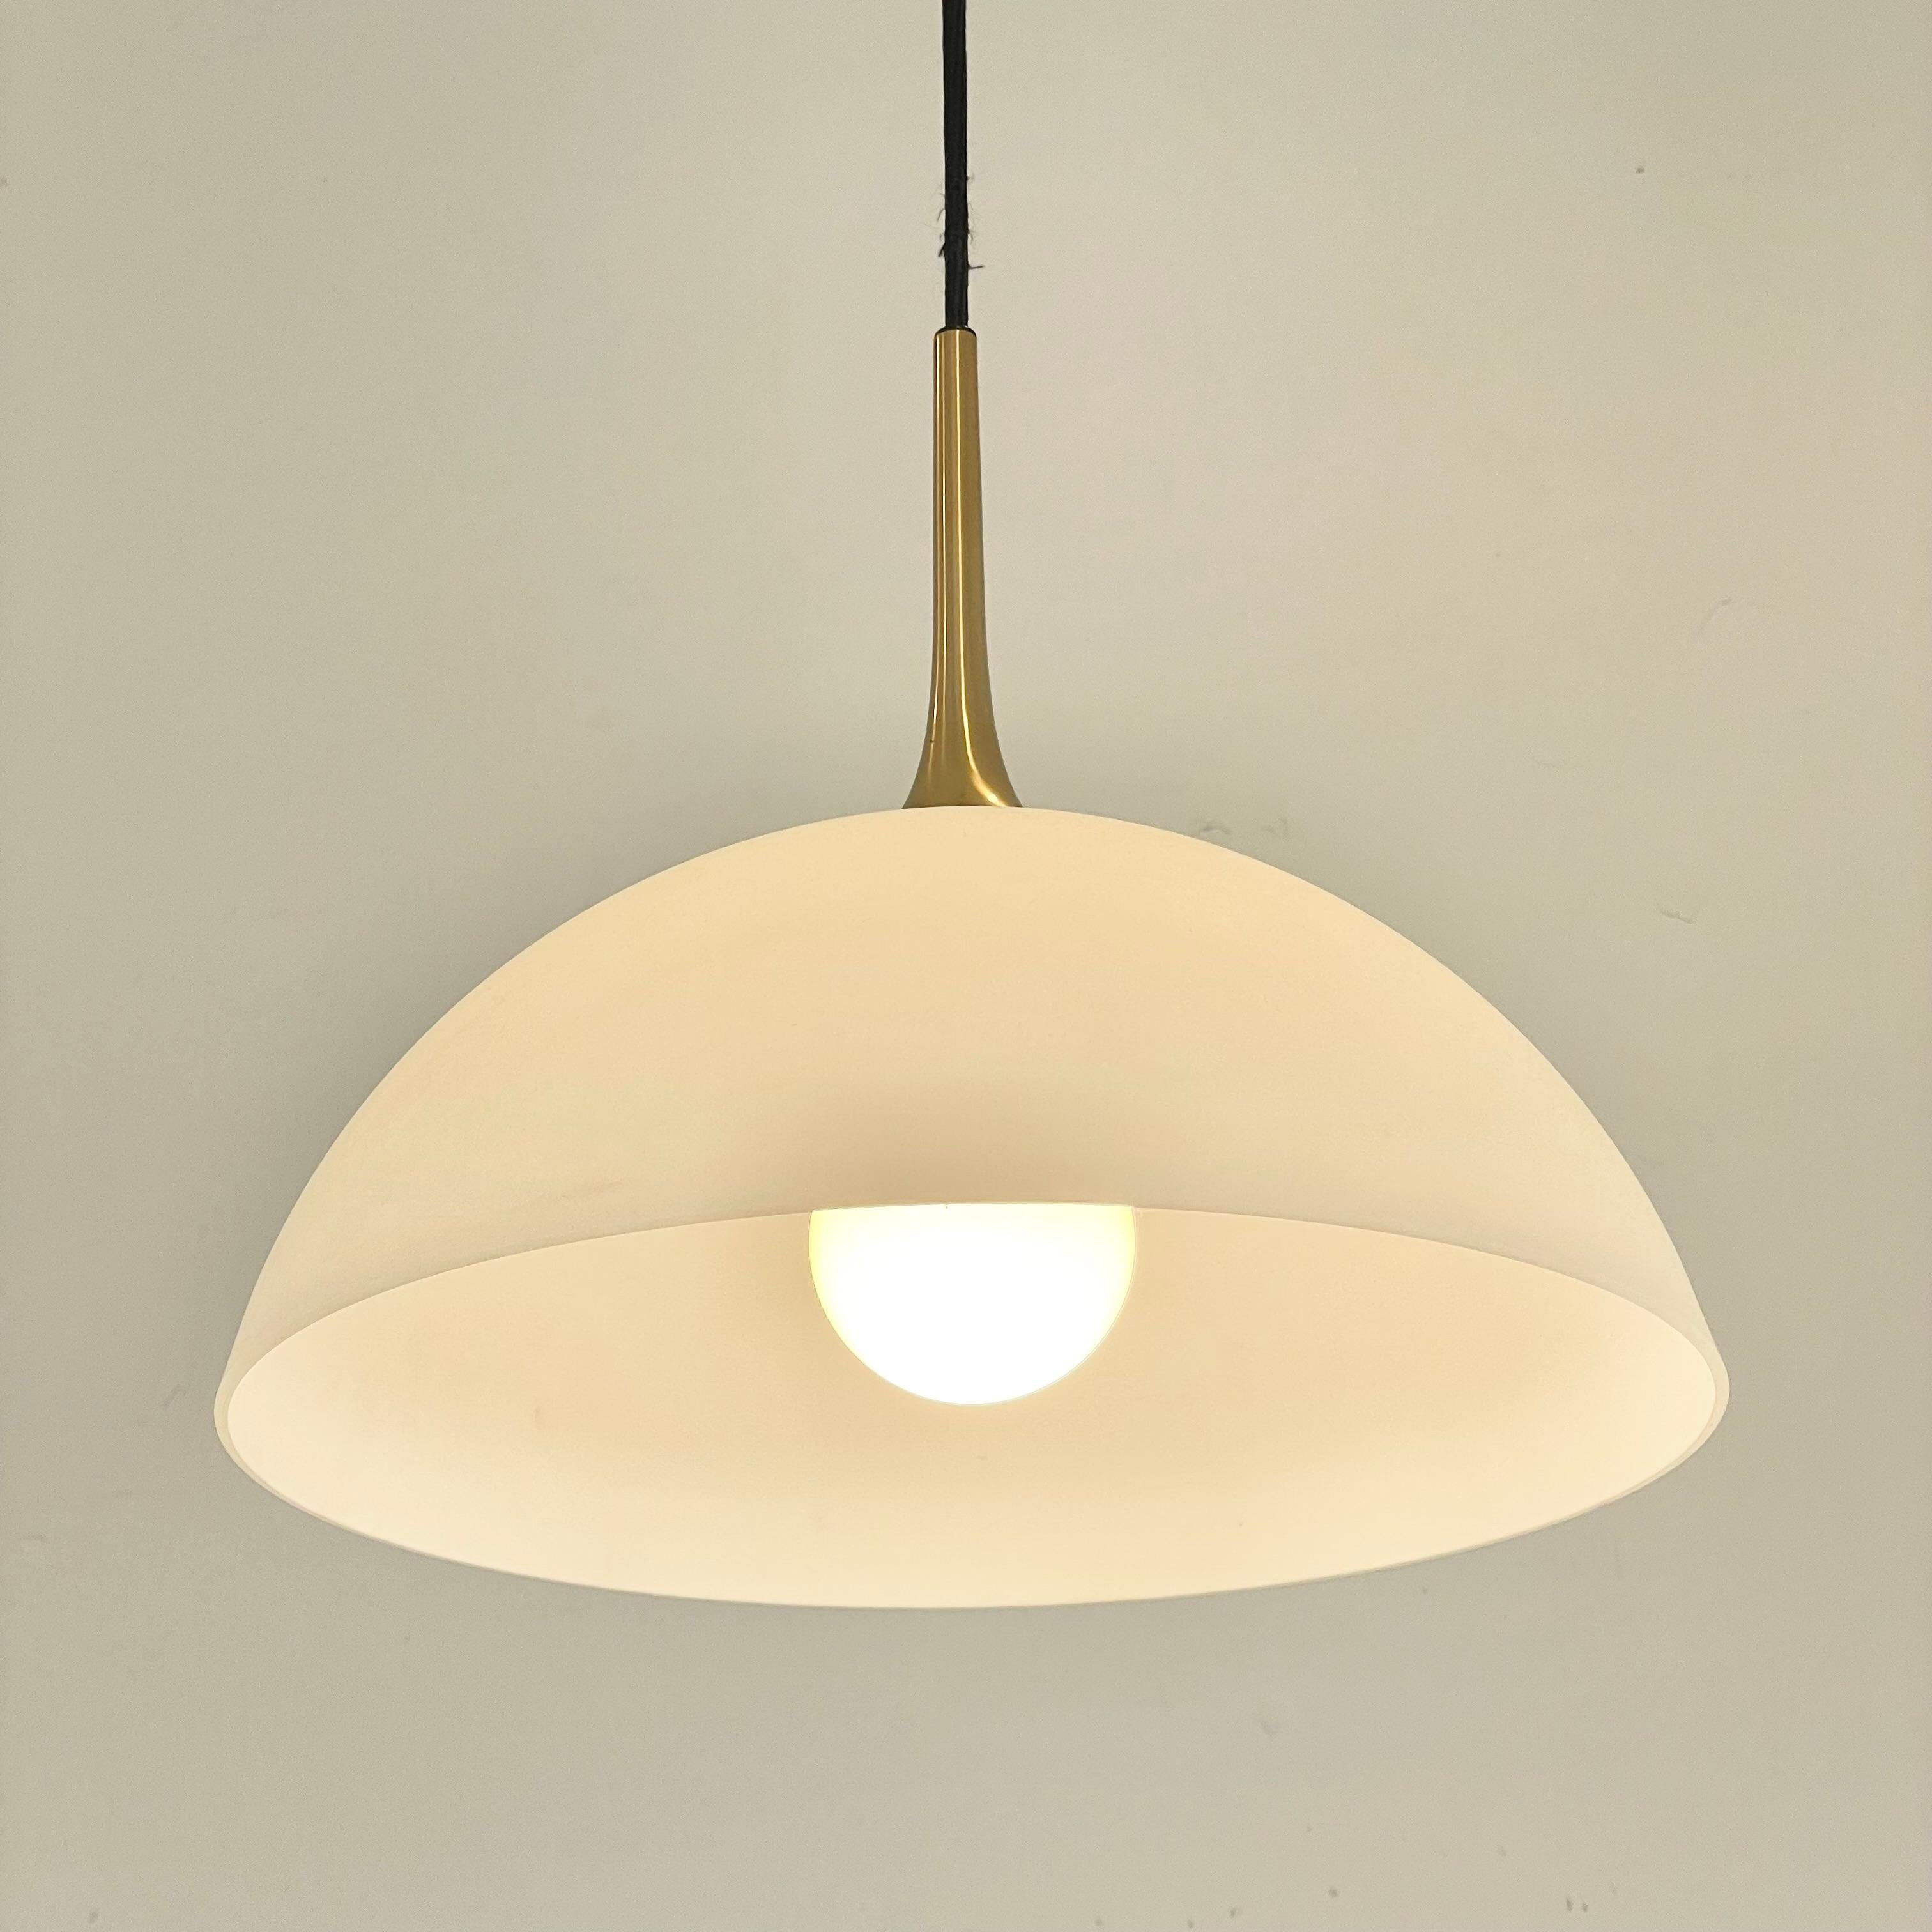 Florian Schulz Counter Balance Pendant with Frosted Glass Shade, 1970s Germany In Good Condition For Sale In Los Angeles, CA